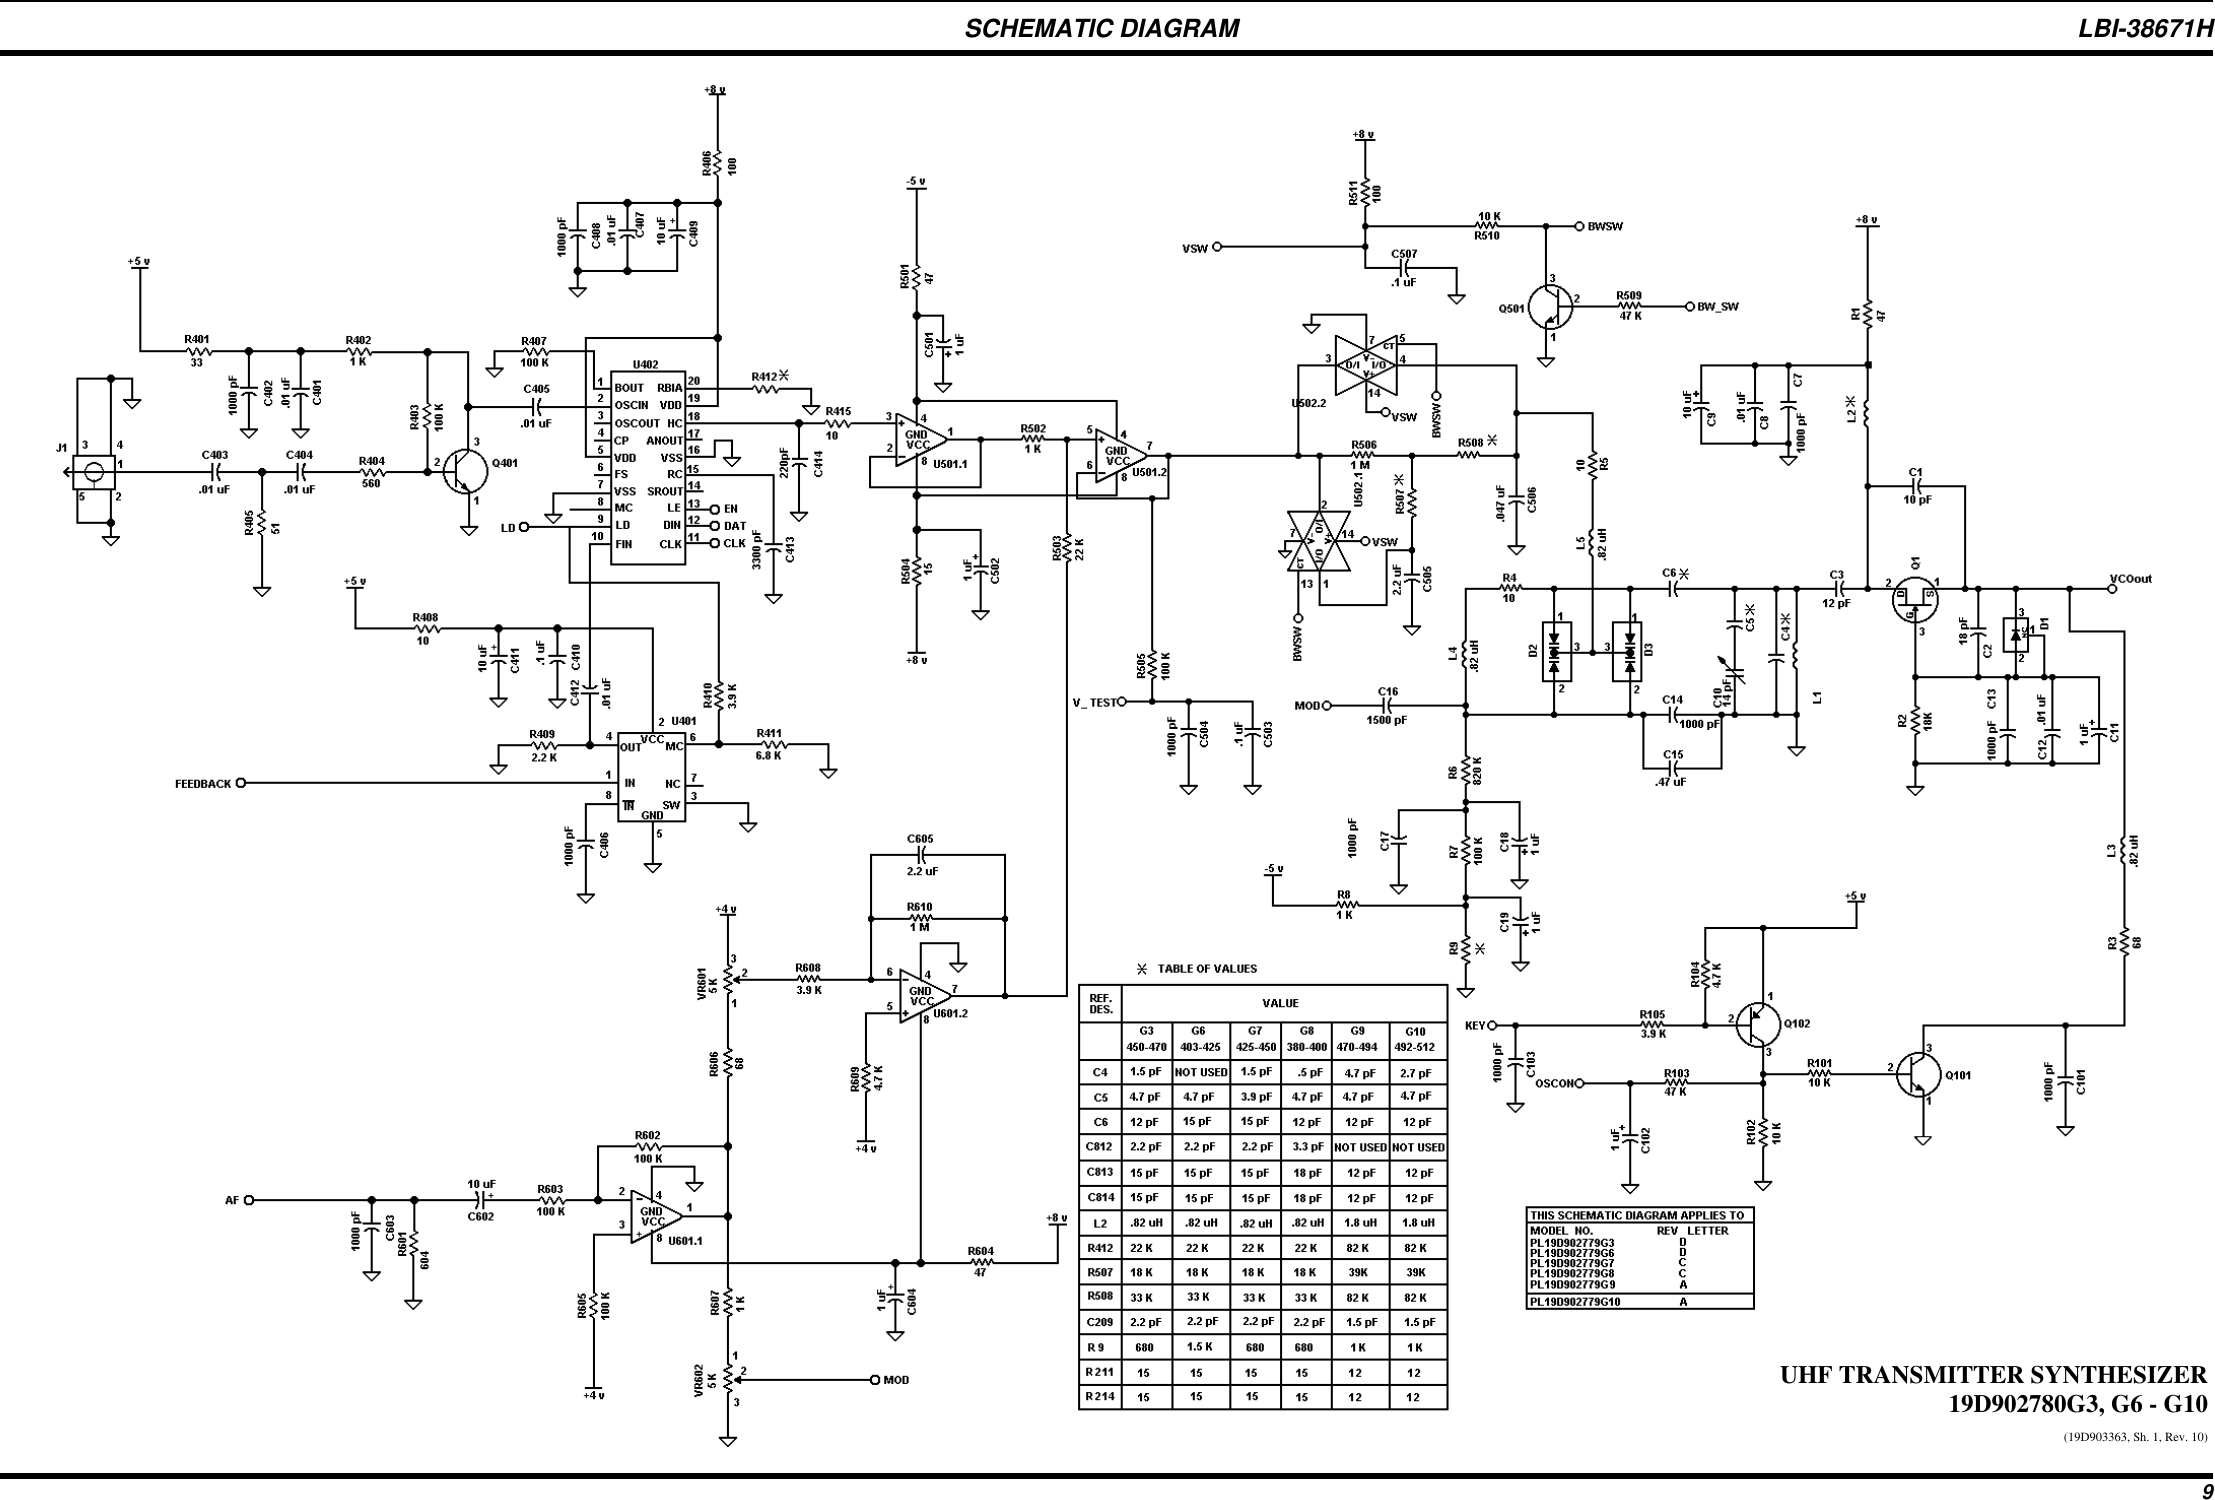 SCHEMATIC DIAGRAMUHF TRANSMITTER SYNTHESIZER19D902780G3, G6 - G10(19D903363, Sh. 1, Rev. 10)LBI-38671H9